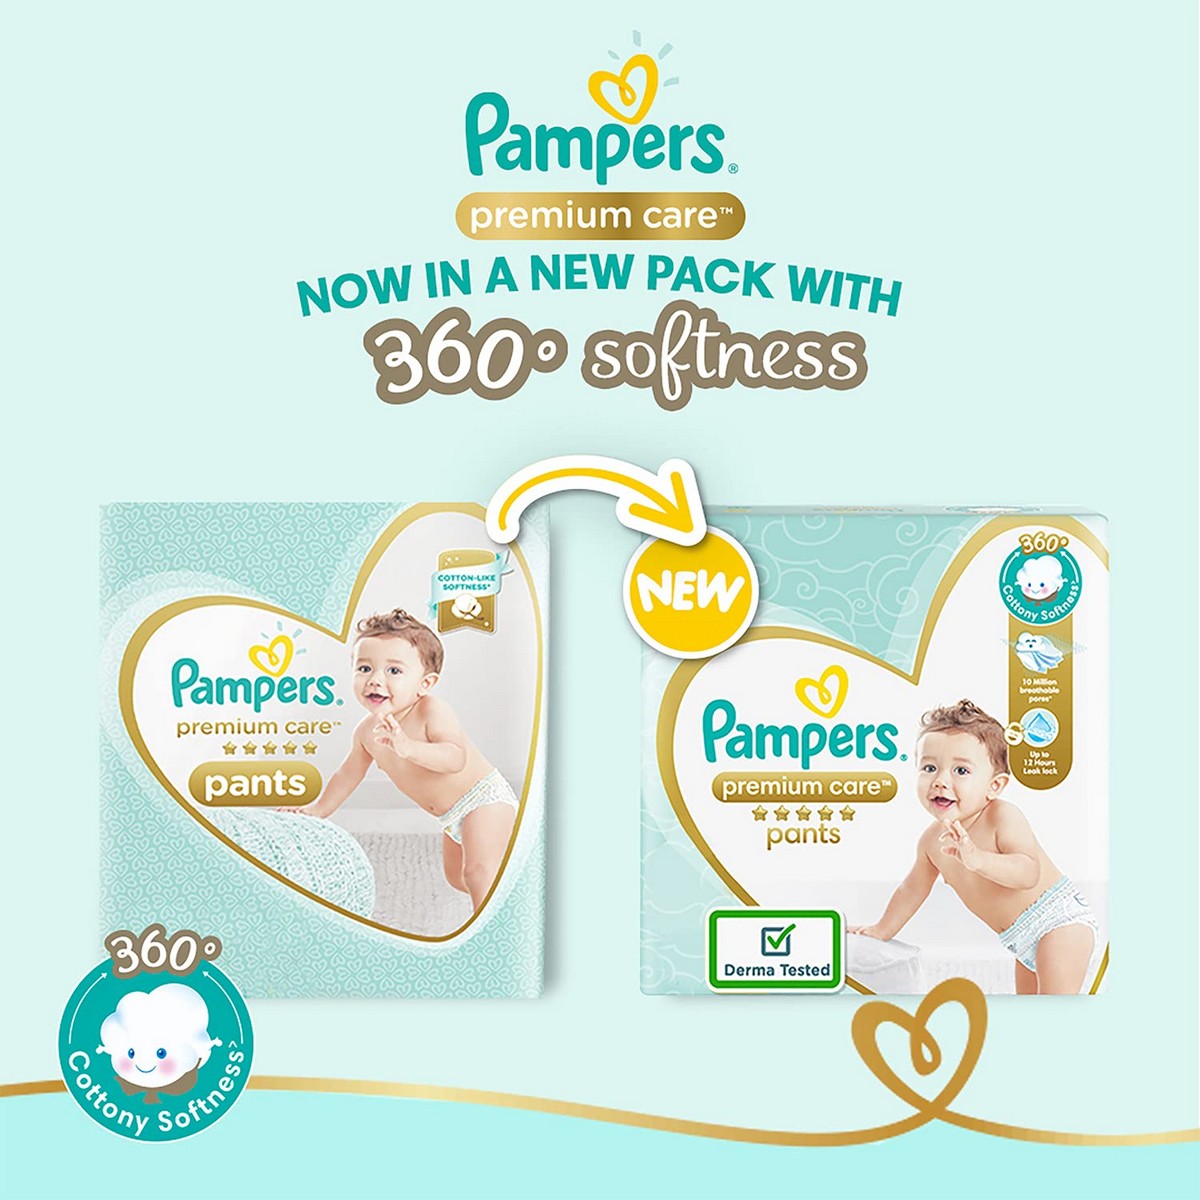 Pampers Premium Care Pants, New Born, Extra Small size baby diapers  (NB,XS), 24 count, Softest ever Pampers Online in India, Buy at Best Price  from Firstcry.com - 2245198